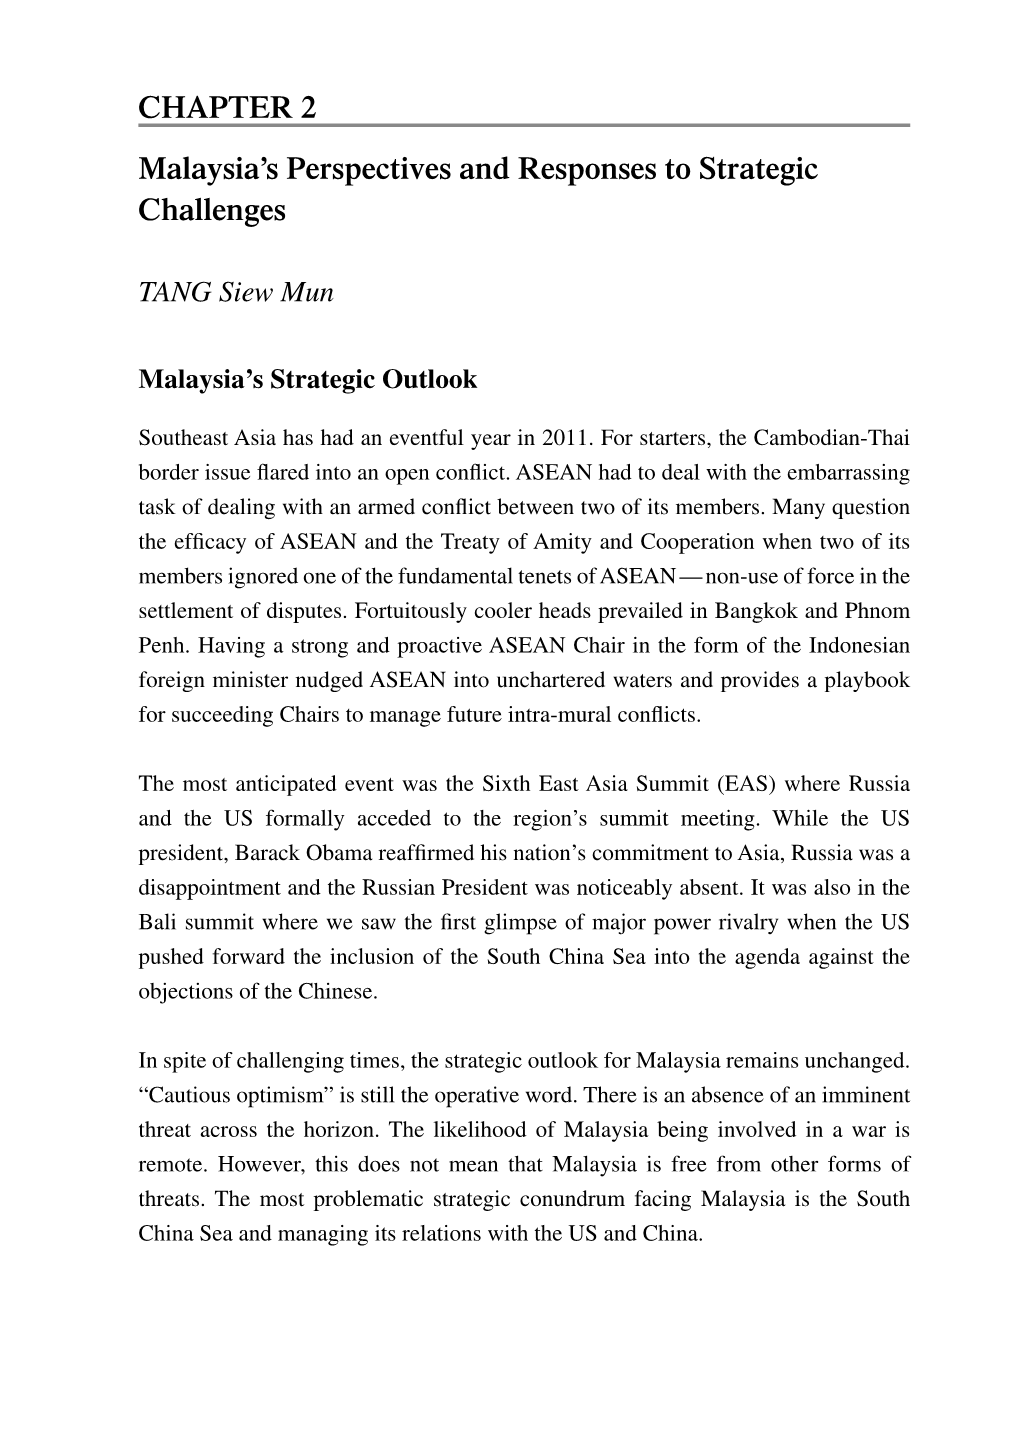 Malaysia's Perspectives and Responses to Strategic Challenges